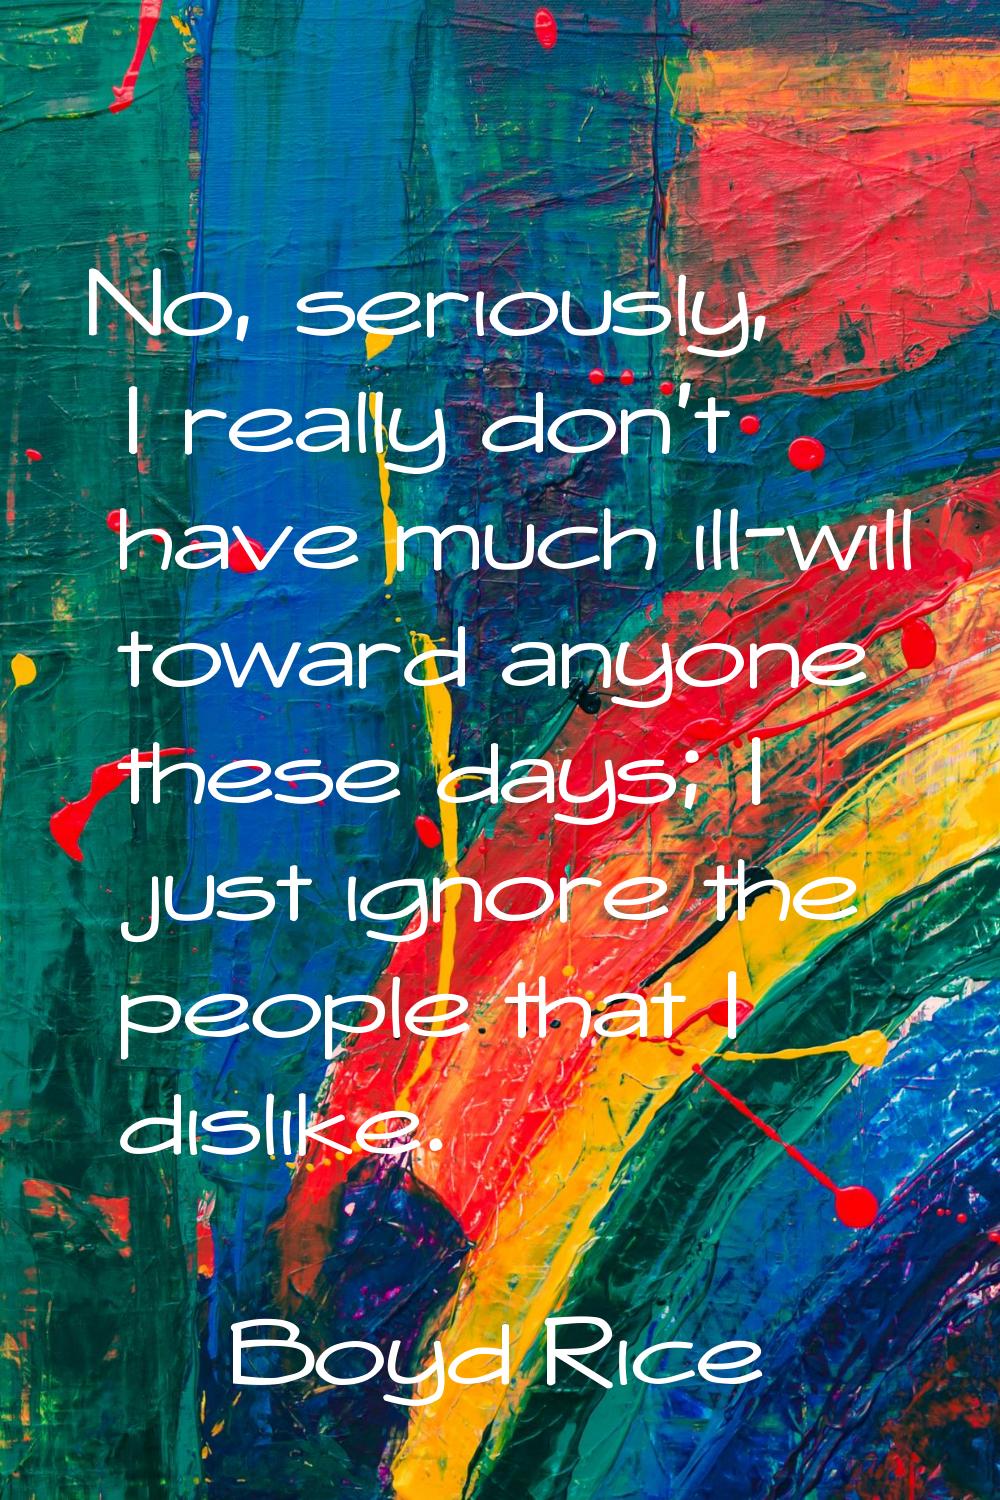 No, seriously, I really don't have much ill-will toward anyone these days; I just ignore the people